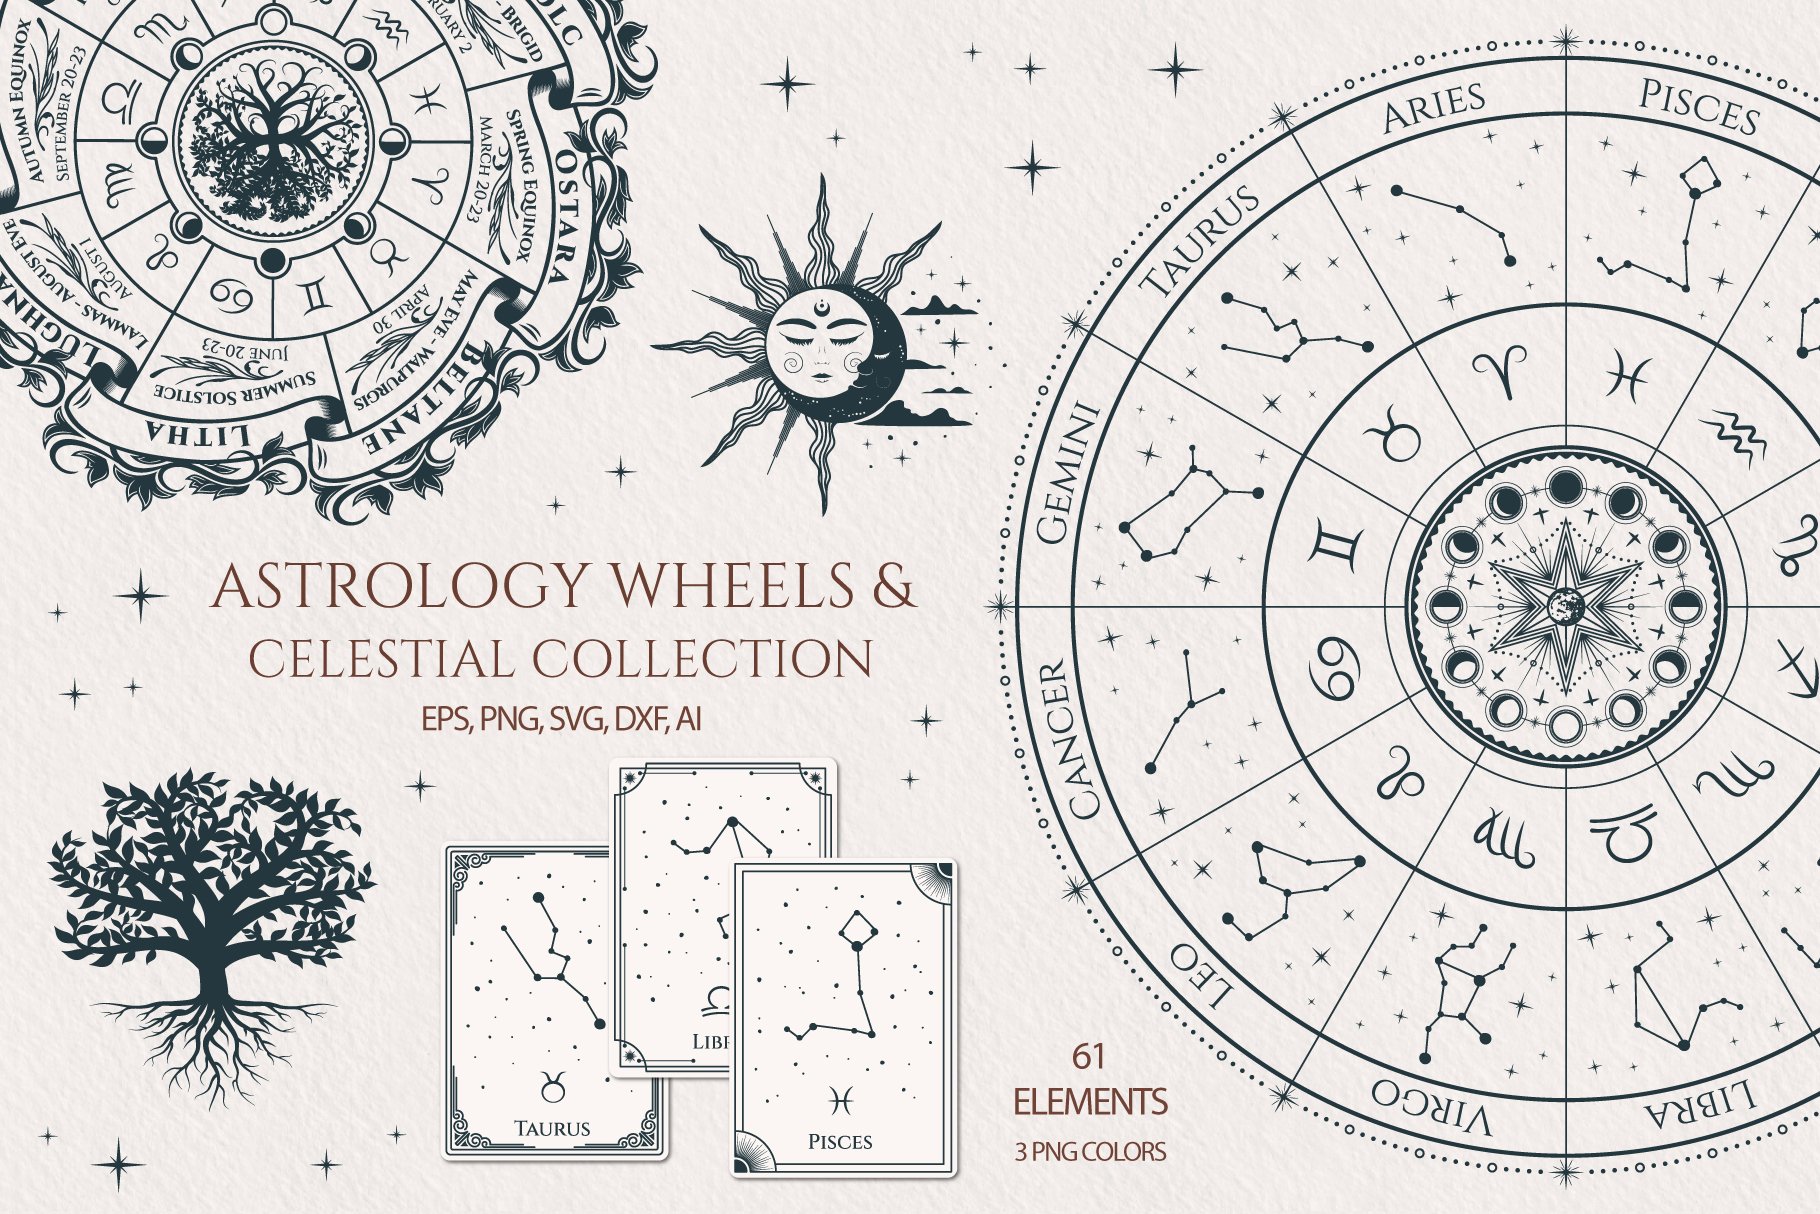 Zodiac Wheel & Wheel of the Year cover image.